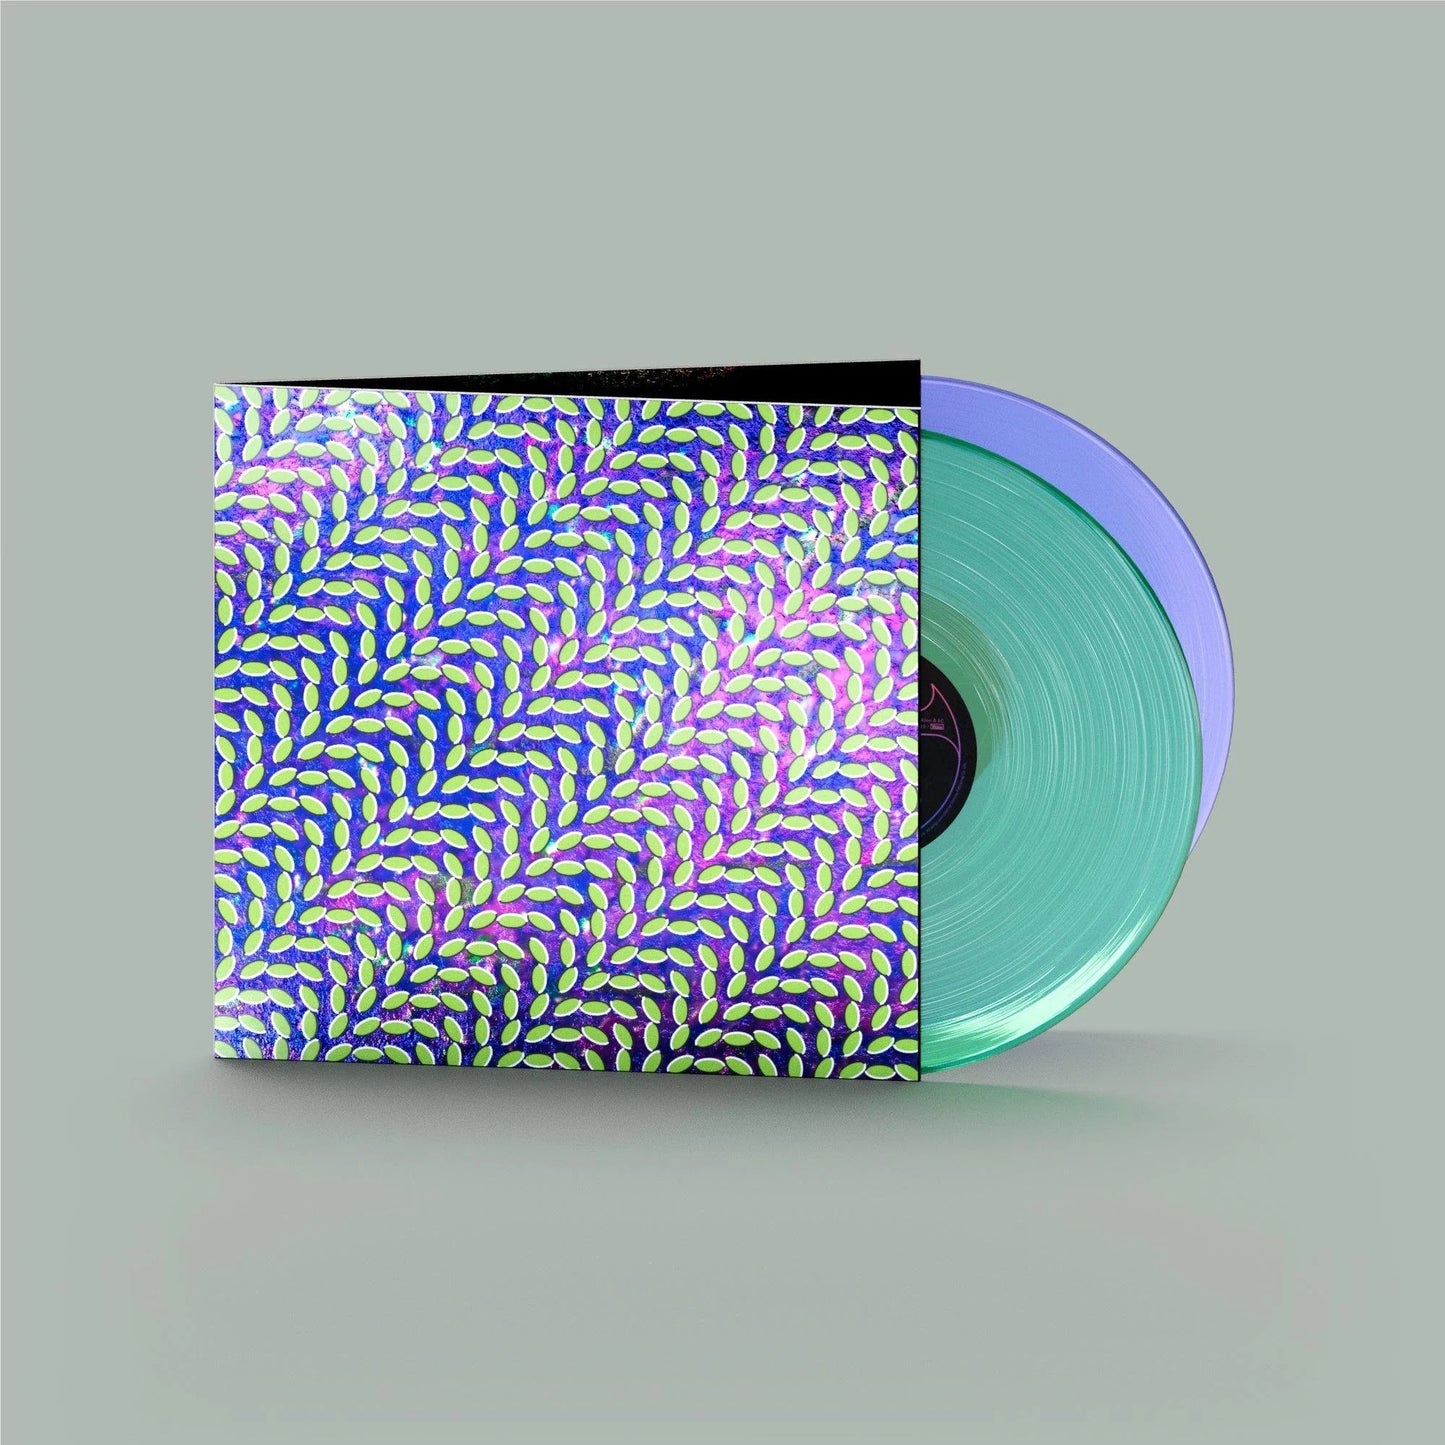 Animal Collective - Merriweather Post Pavillion Deluxe | Buy the Vinyl LP from Flying Nun